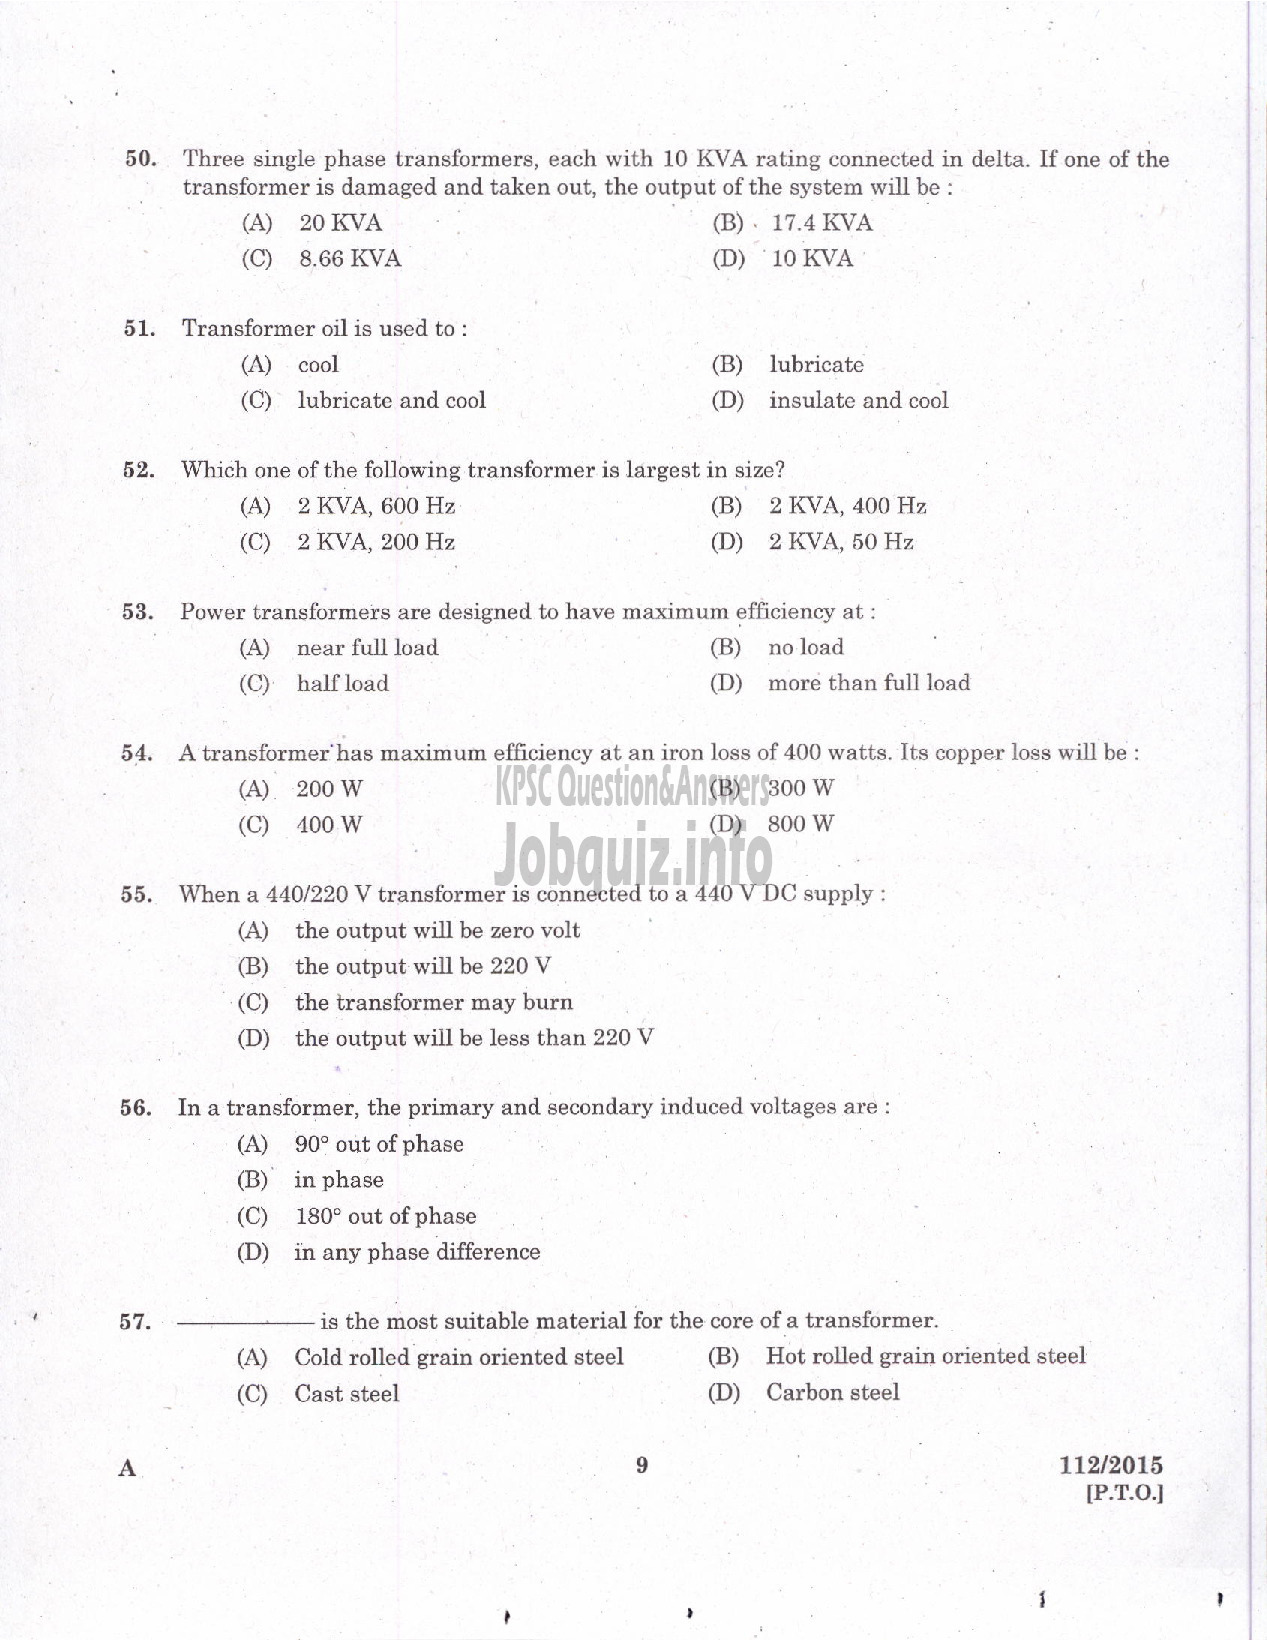 Kerala PSC Question Paper - TRADESMAN ELECTRICAL TECHNICAL EDUCATION/ELECTRICIAN GROUND WATER /ELECTRICIAN GR II PRINTING GOVT PRESSES ELECTRICIAN AGRICULTURE /ELECTRICIAN GR II THE KERALA CERAMICS LTD-7